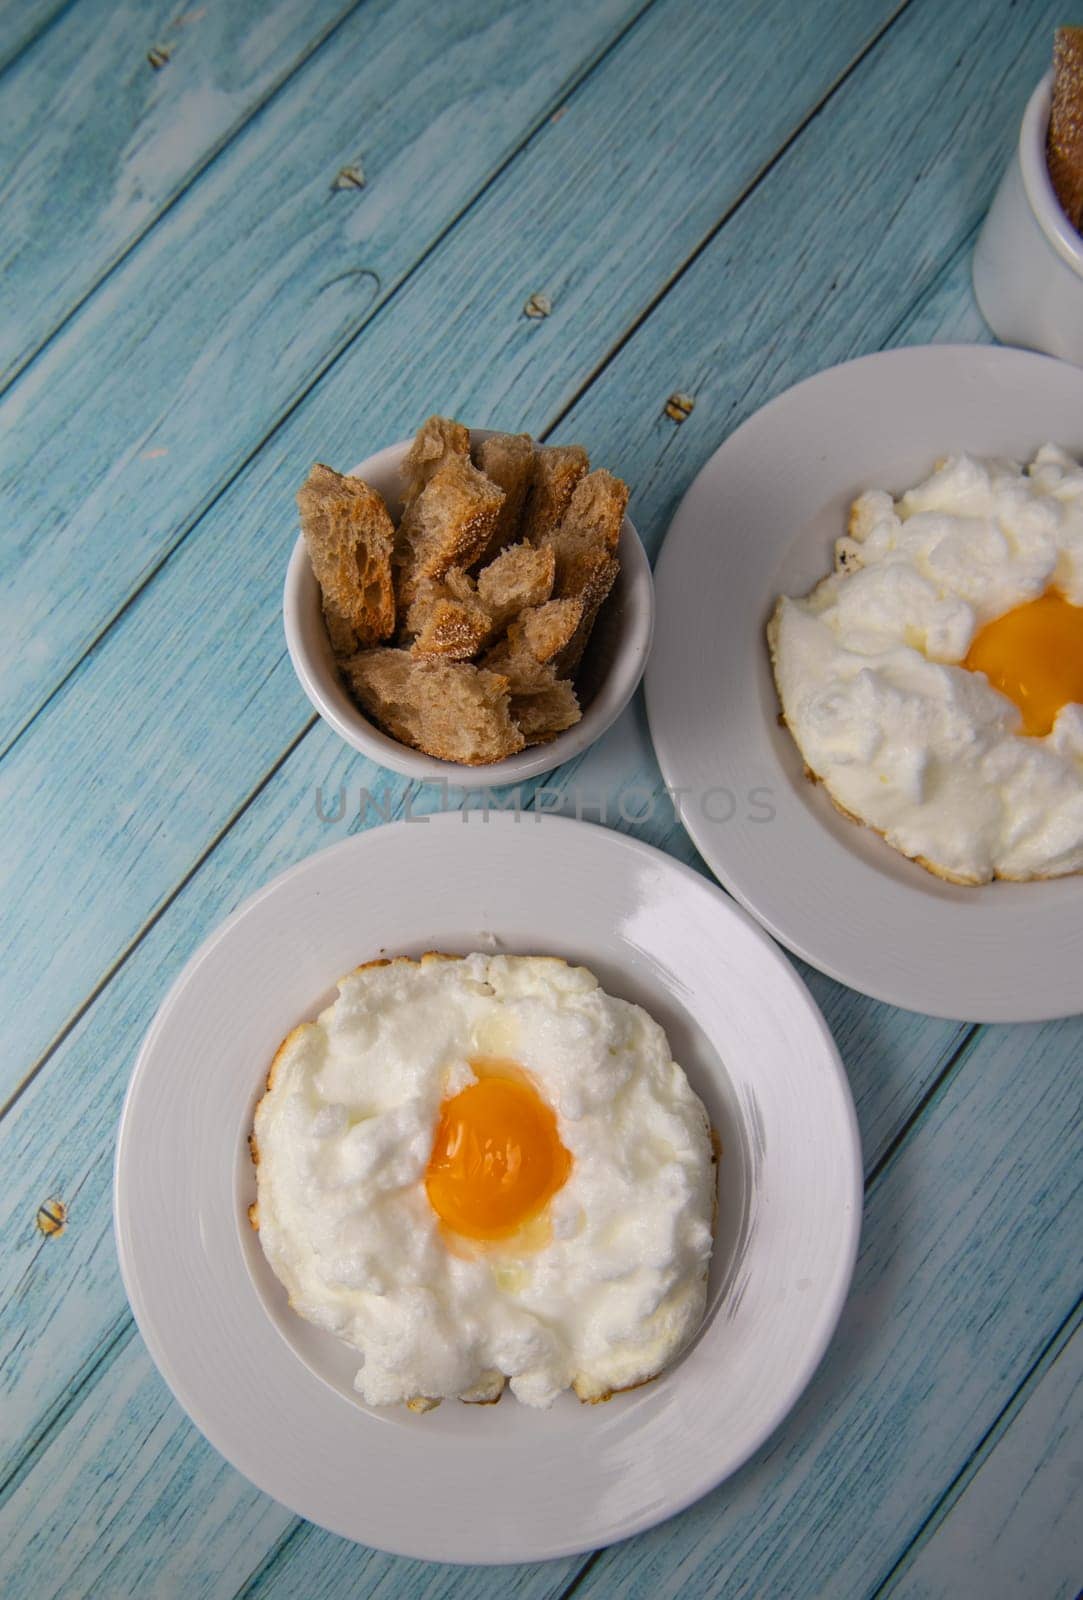 Recipe for Cloudy Eggs, Icloud Egg. High quality photo